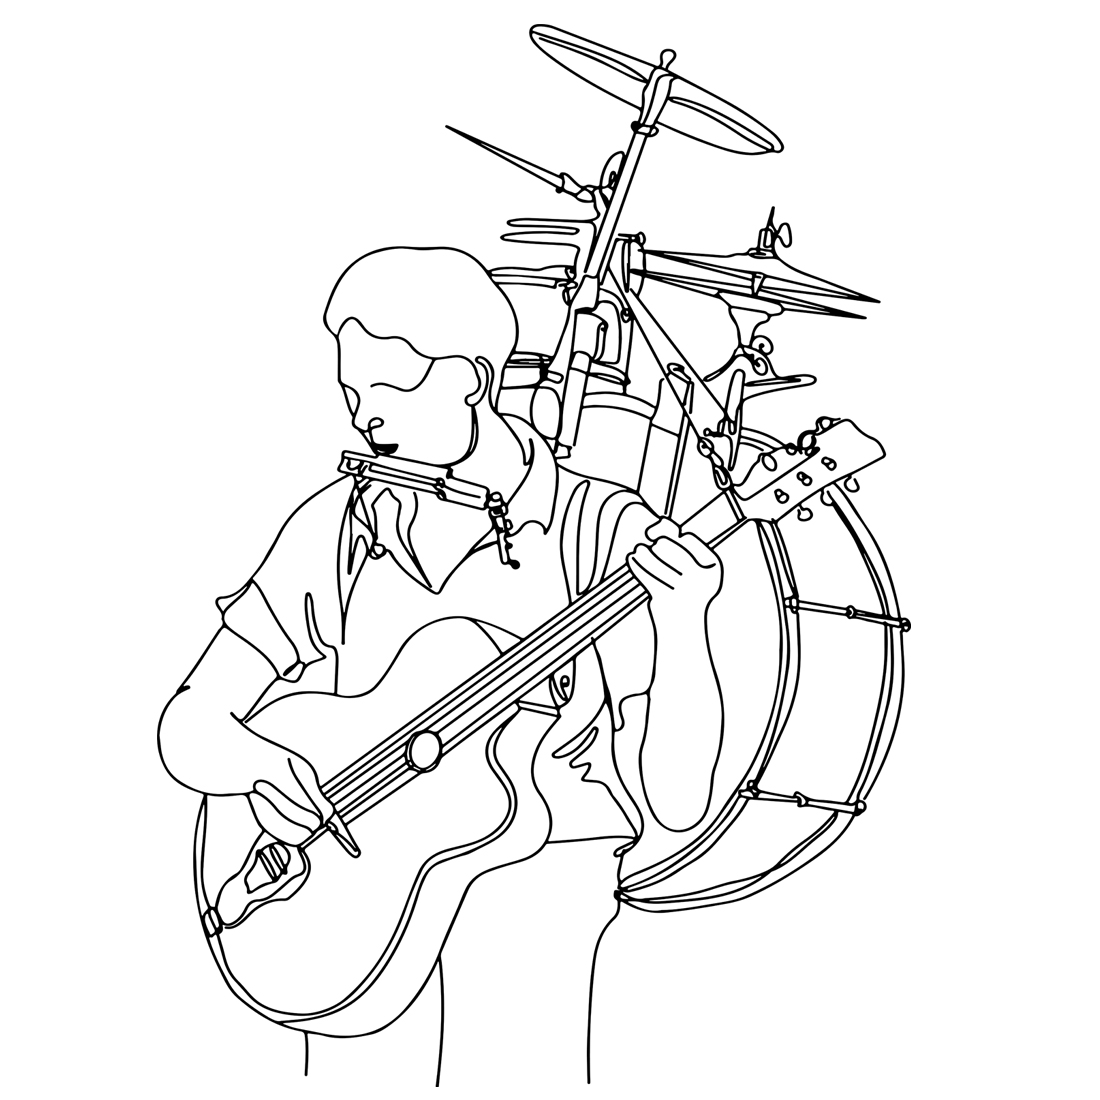 Hand-Drawn Cartoon: Musical One-Man Band Street Performance, Street Musician's Melody: Cartoon Sketch of Multi-Instrument Talent, One-Man Band in Action preview image.